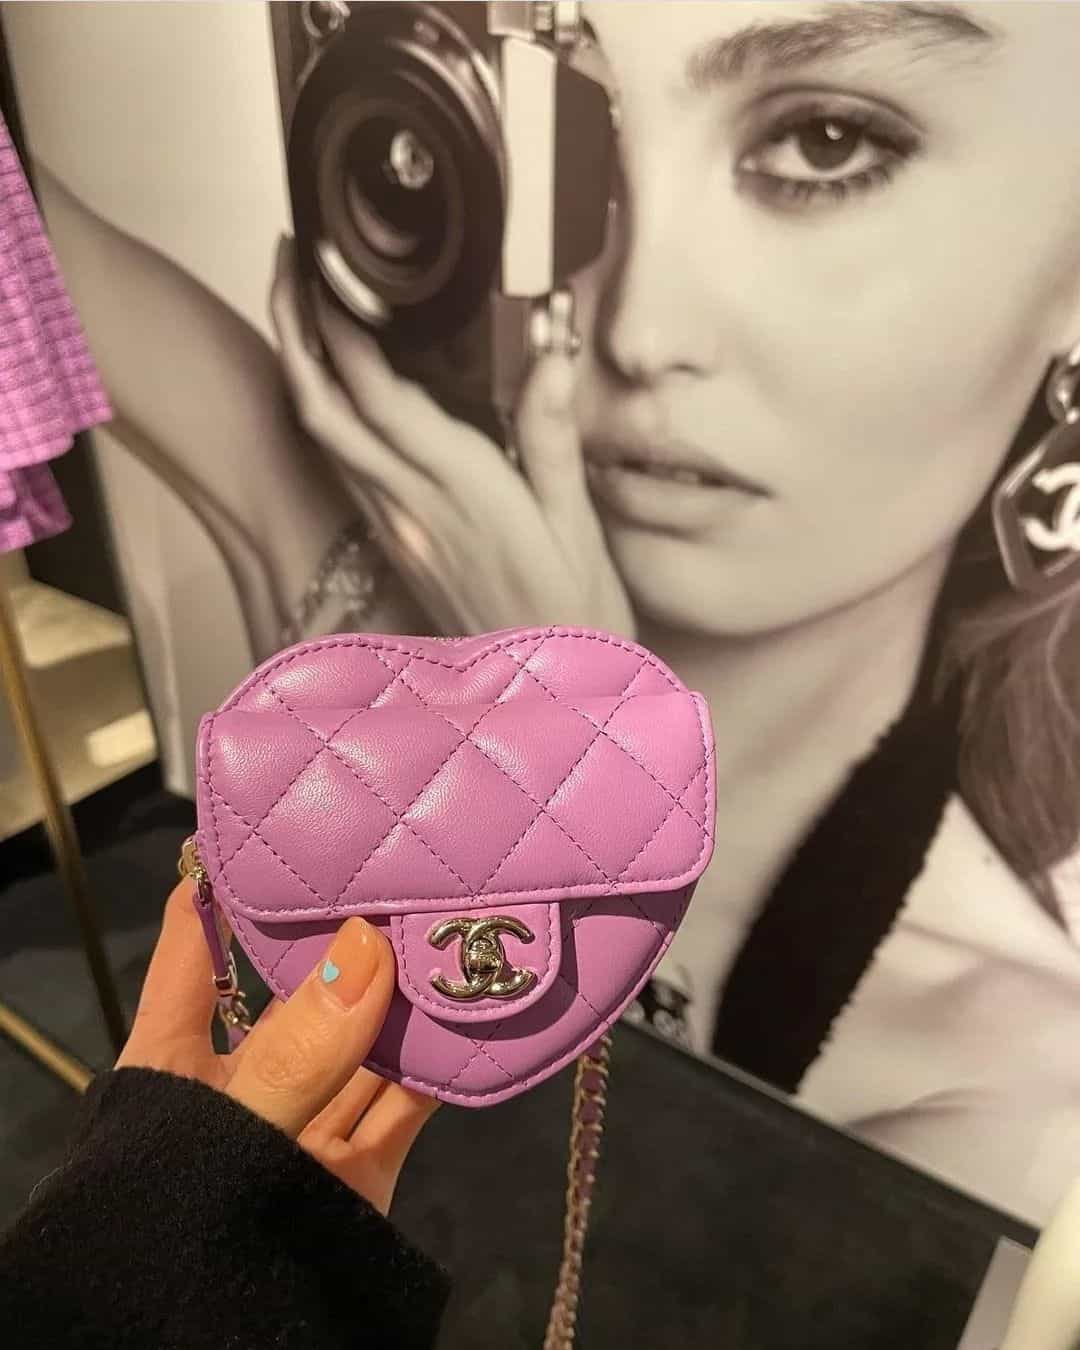 New Chanel Heart Shaped Bag for 2022￼ • Petite in Paris